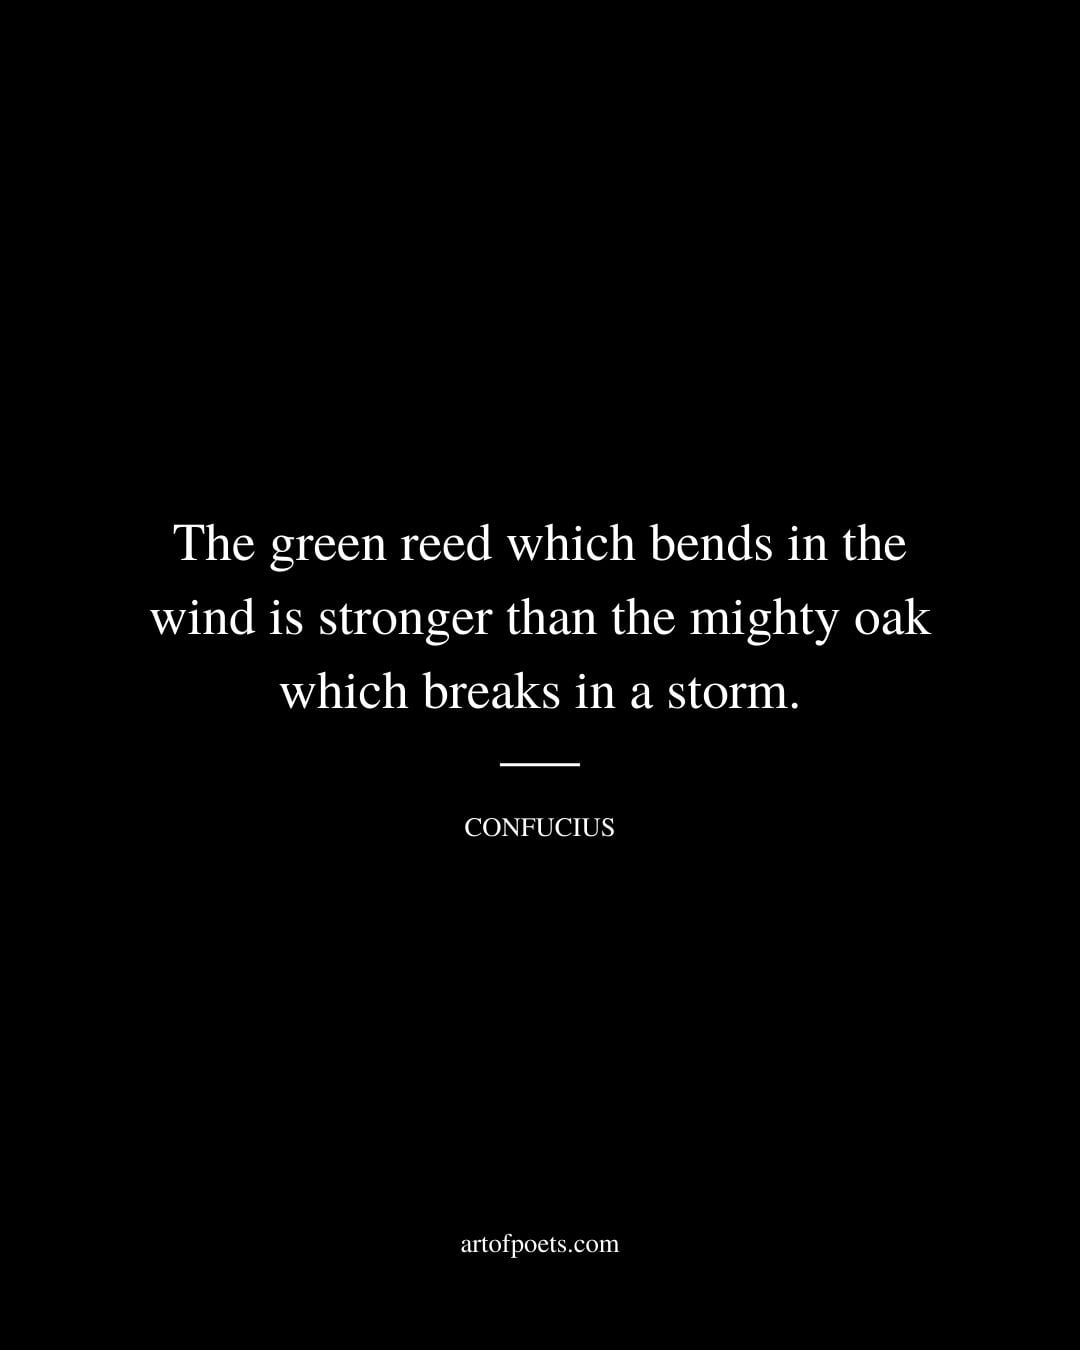 The green reed which bends in the wind is stronger than the mighty oak which breaks in a storm